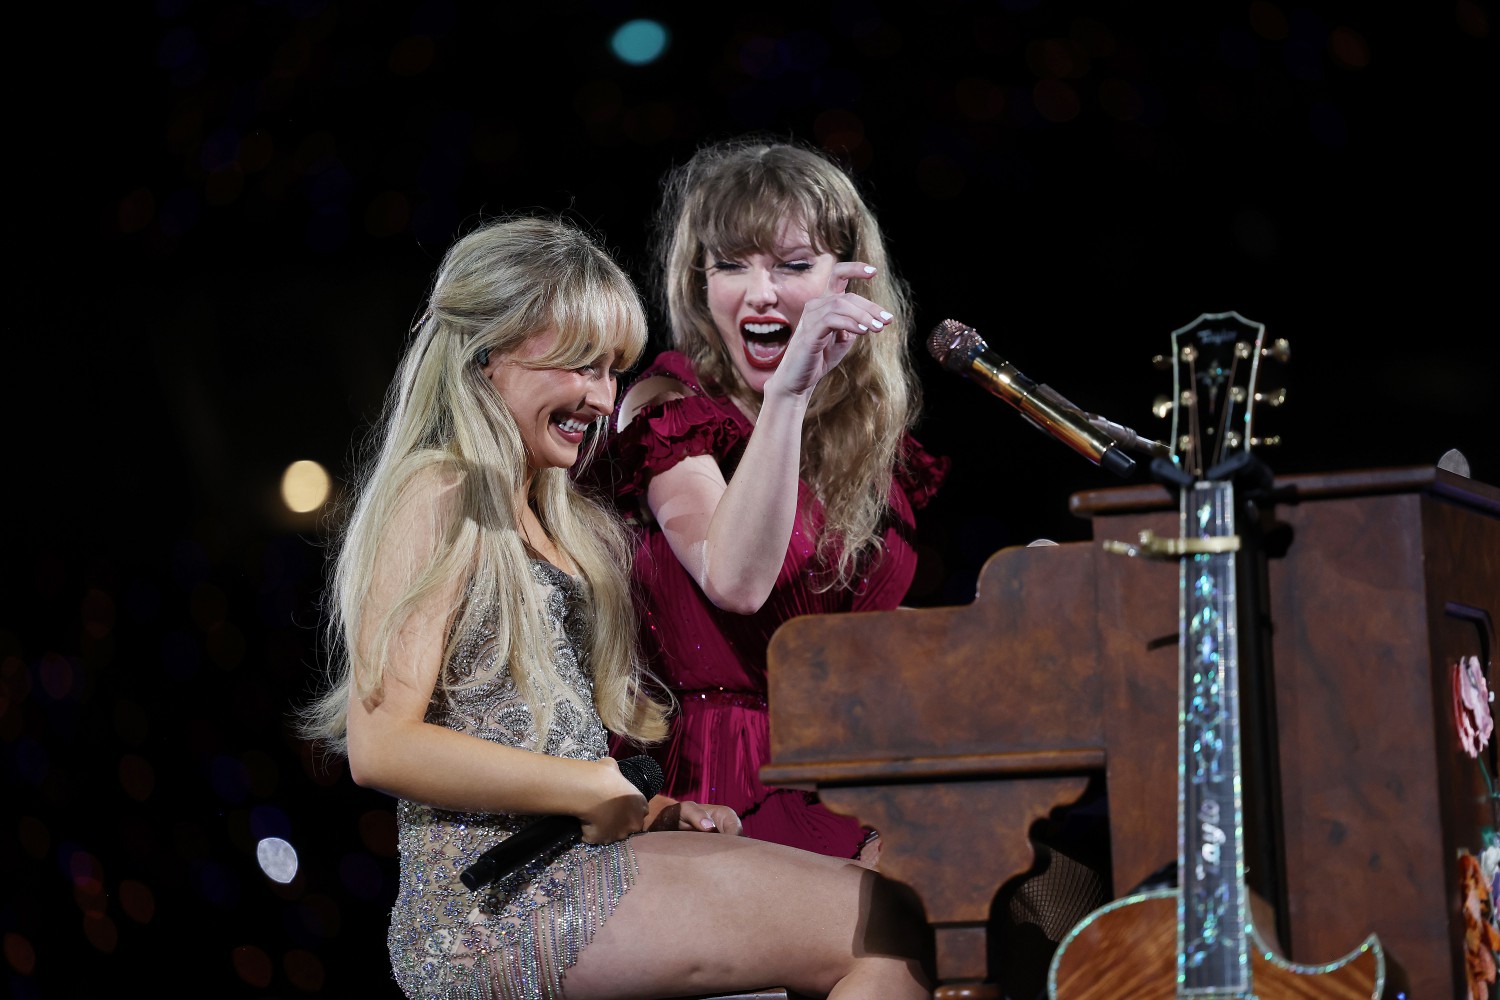 Sabrina Carpenter opened up for Taylor Swift during a portion of The Eras Tour